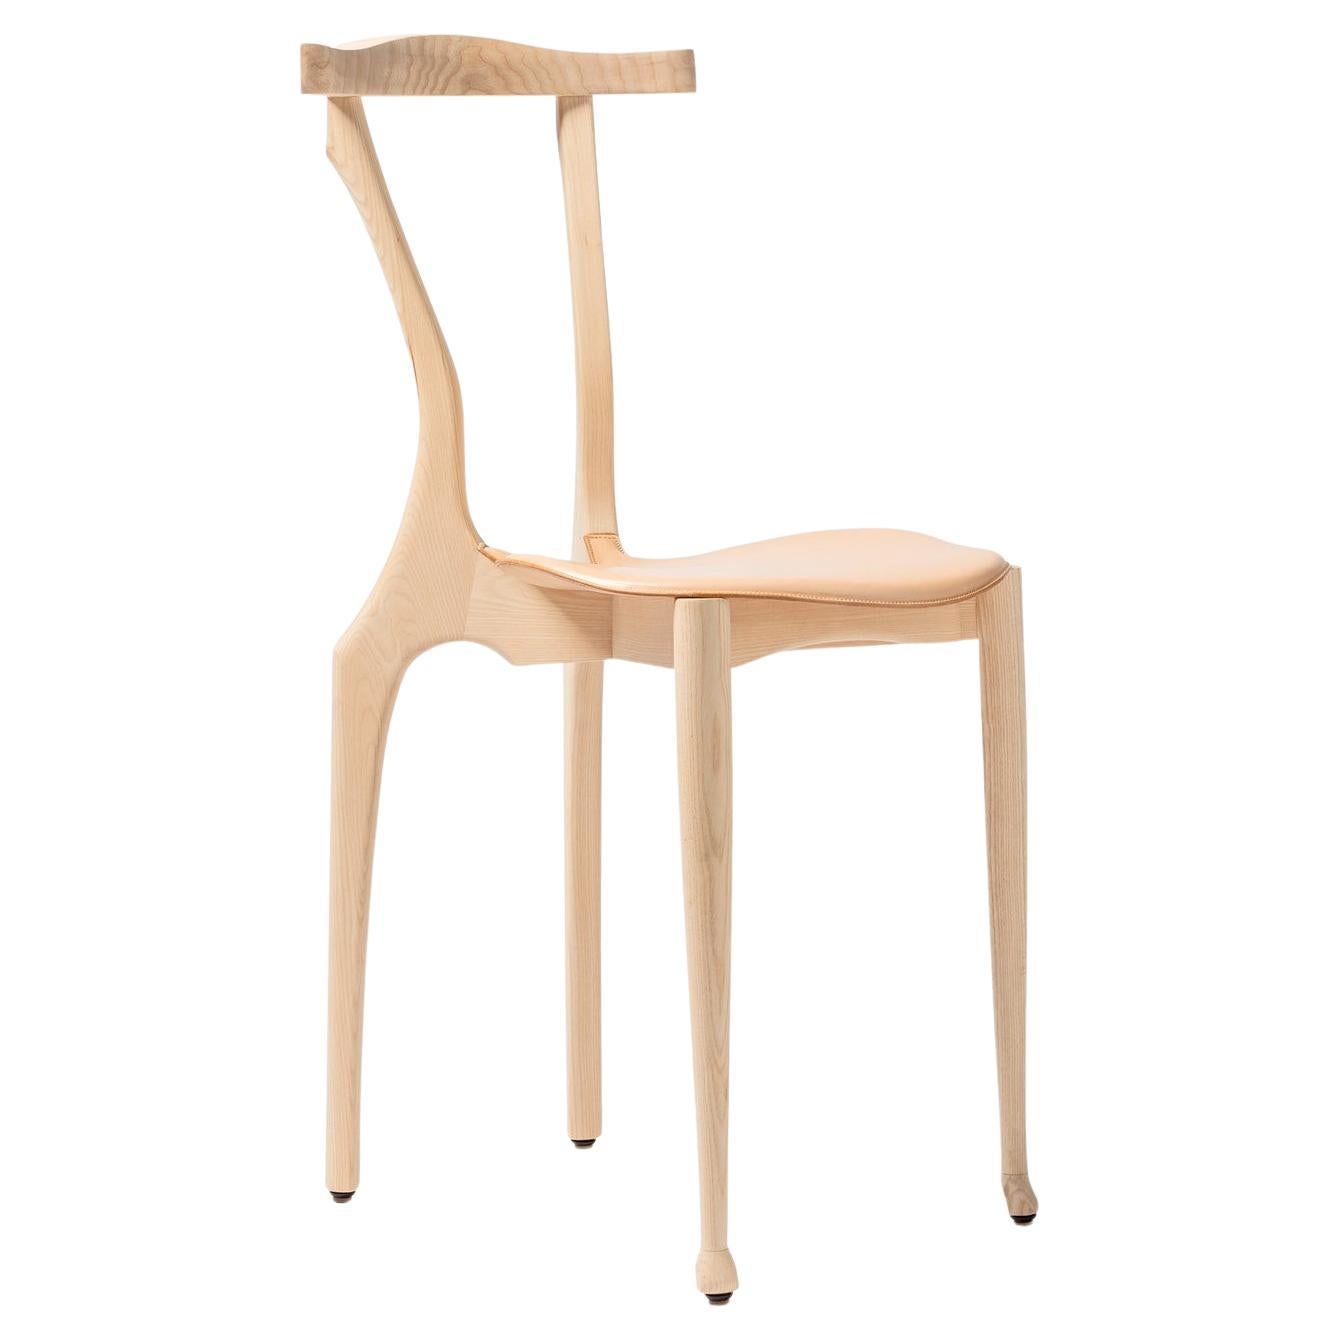 Spanish Dining Chair "Gaulinetta" by Oscar Tusquets, Ash Wood Gaulino Collection For Sale